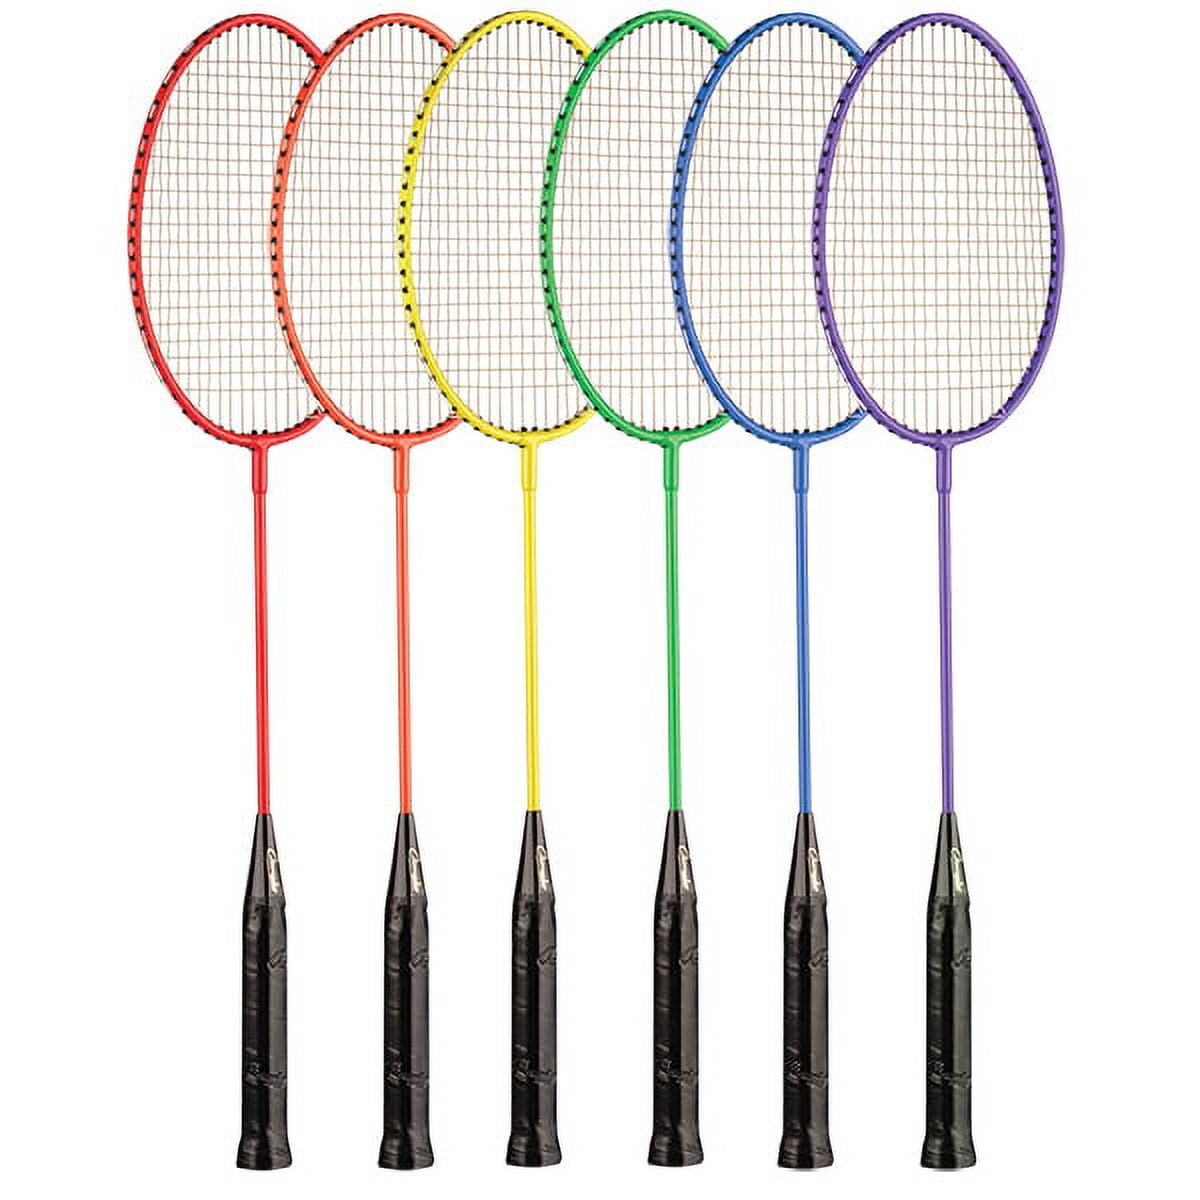 Picture of Champion Sports BR20SET 26 x 8 x 1 in. All Steel Frame Badminton Racket, Assorted Colors